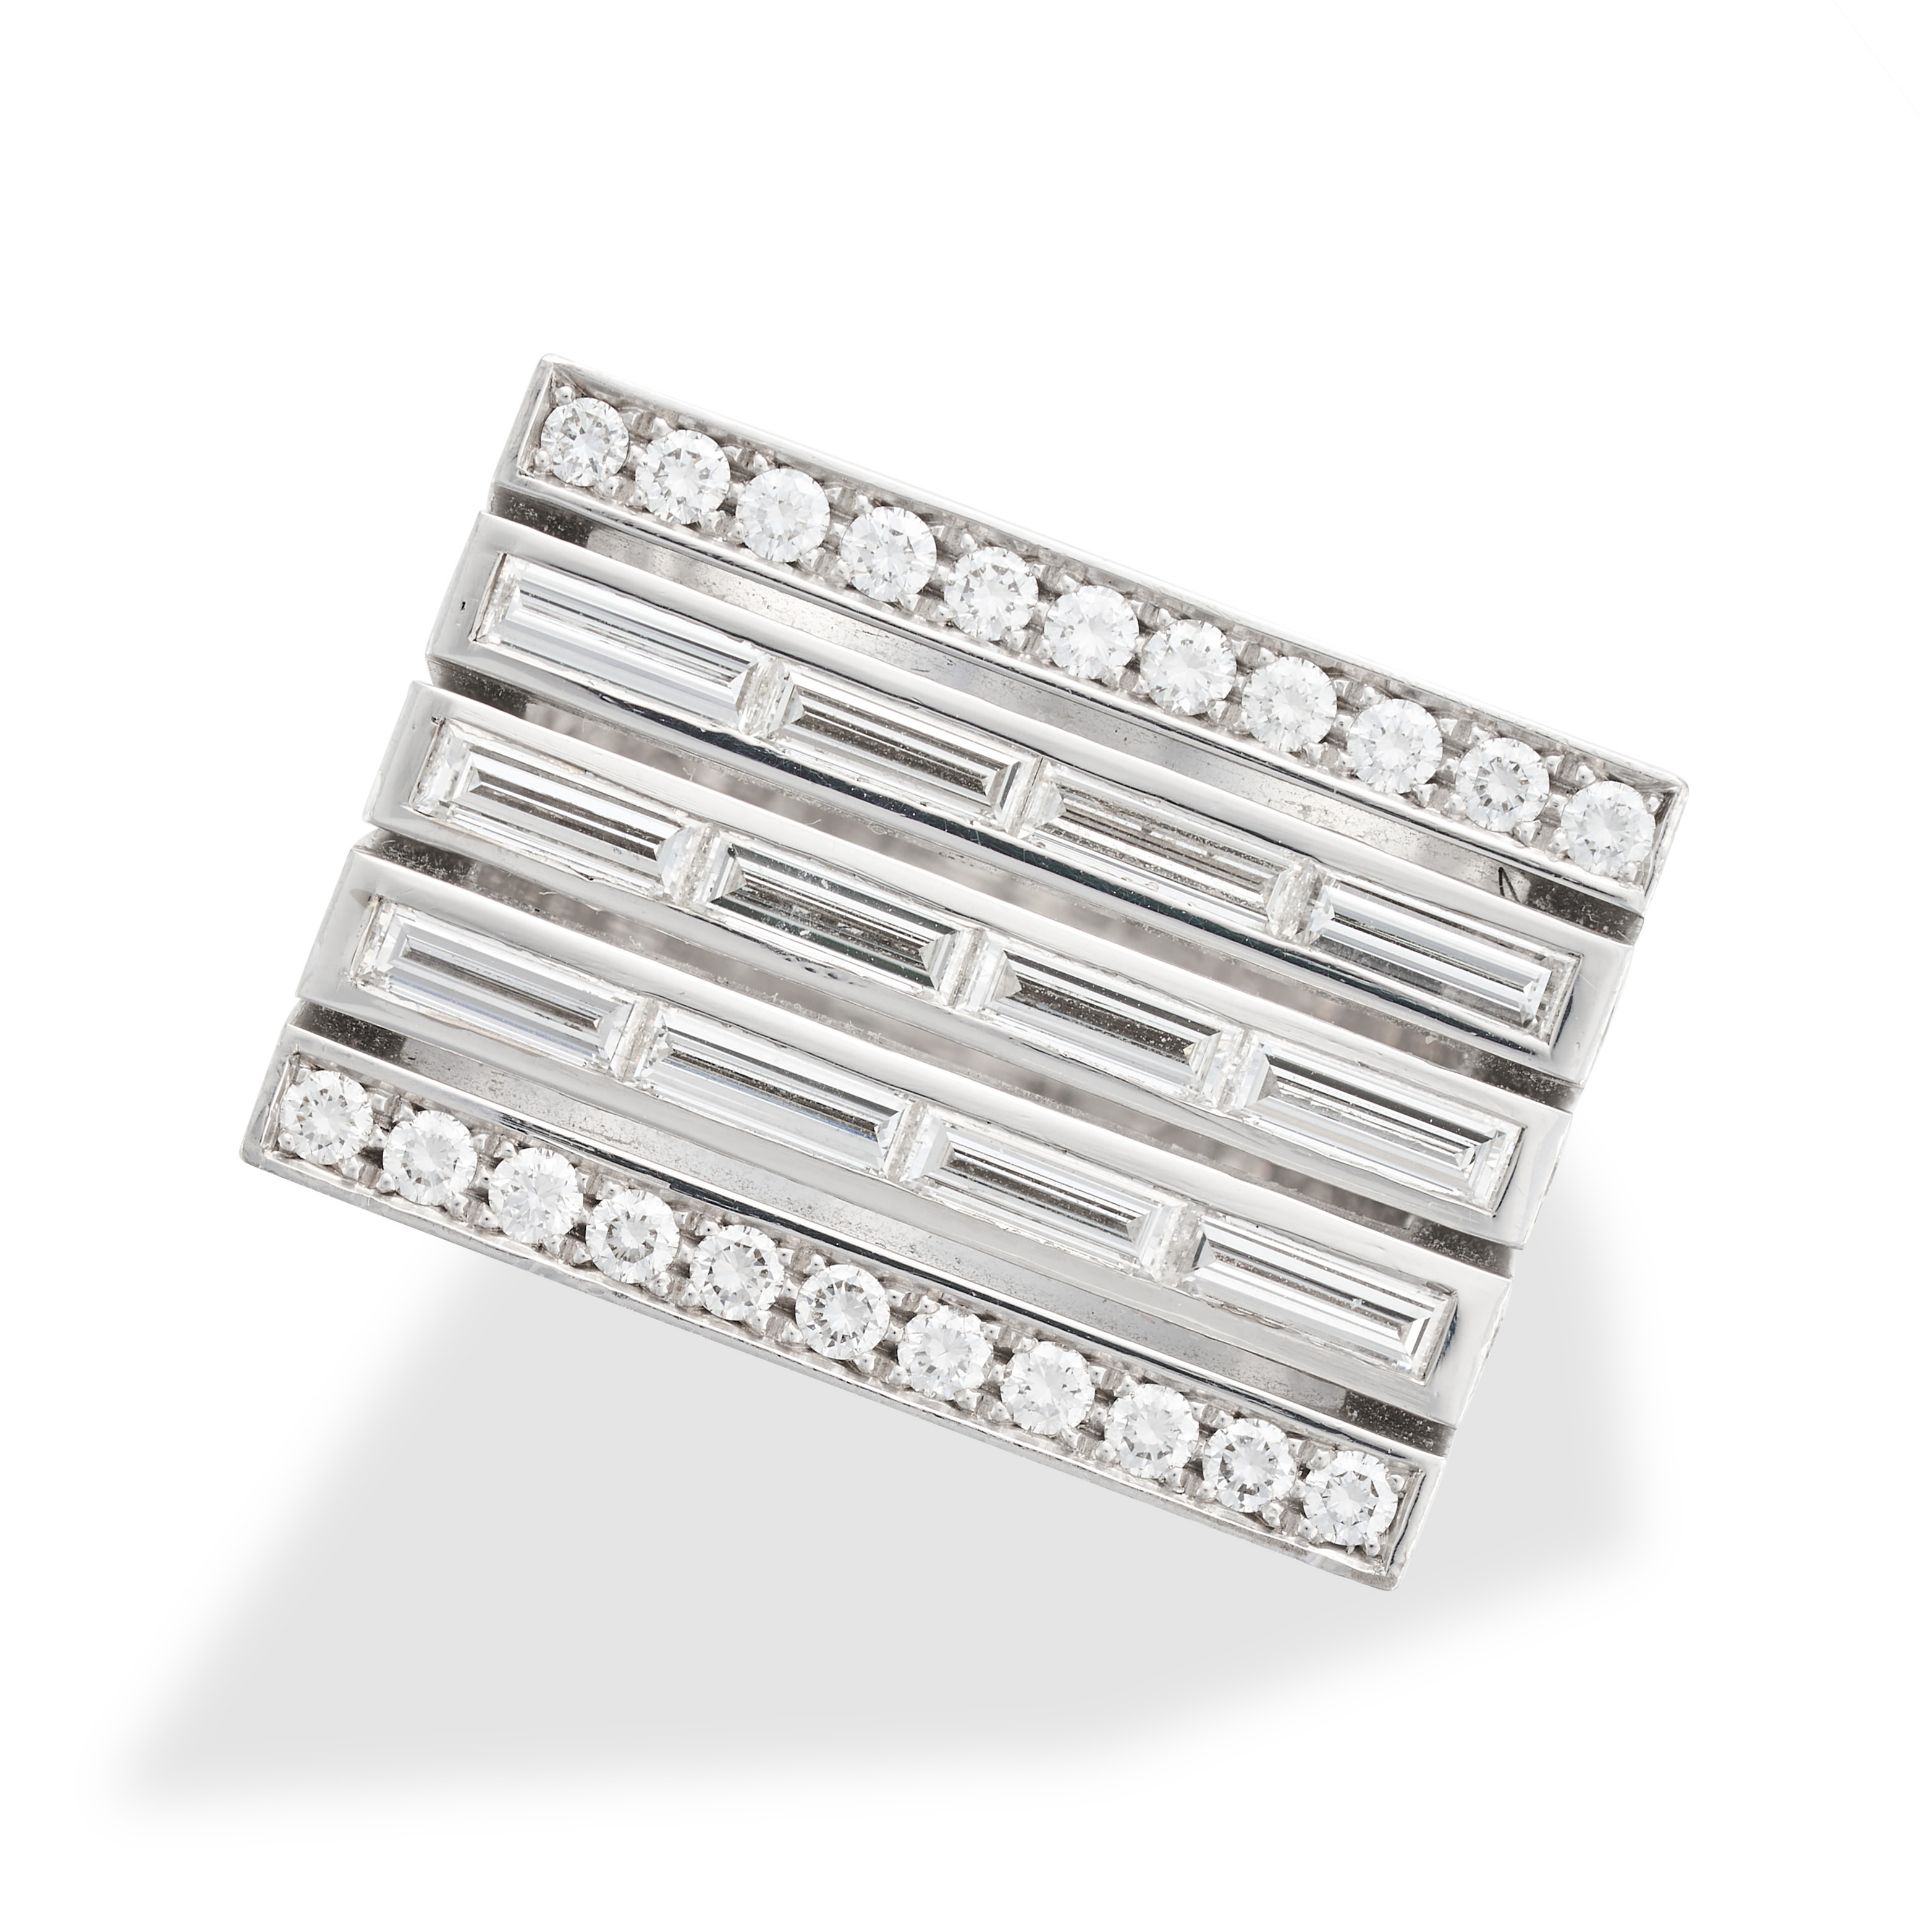 PIAGET, A DIAMOND FREEDOM RING set with three rows of baguette cut diamonds, accented by rows of ...